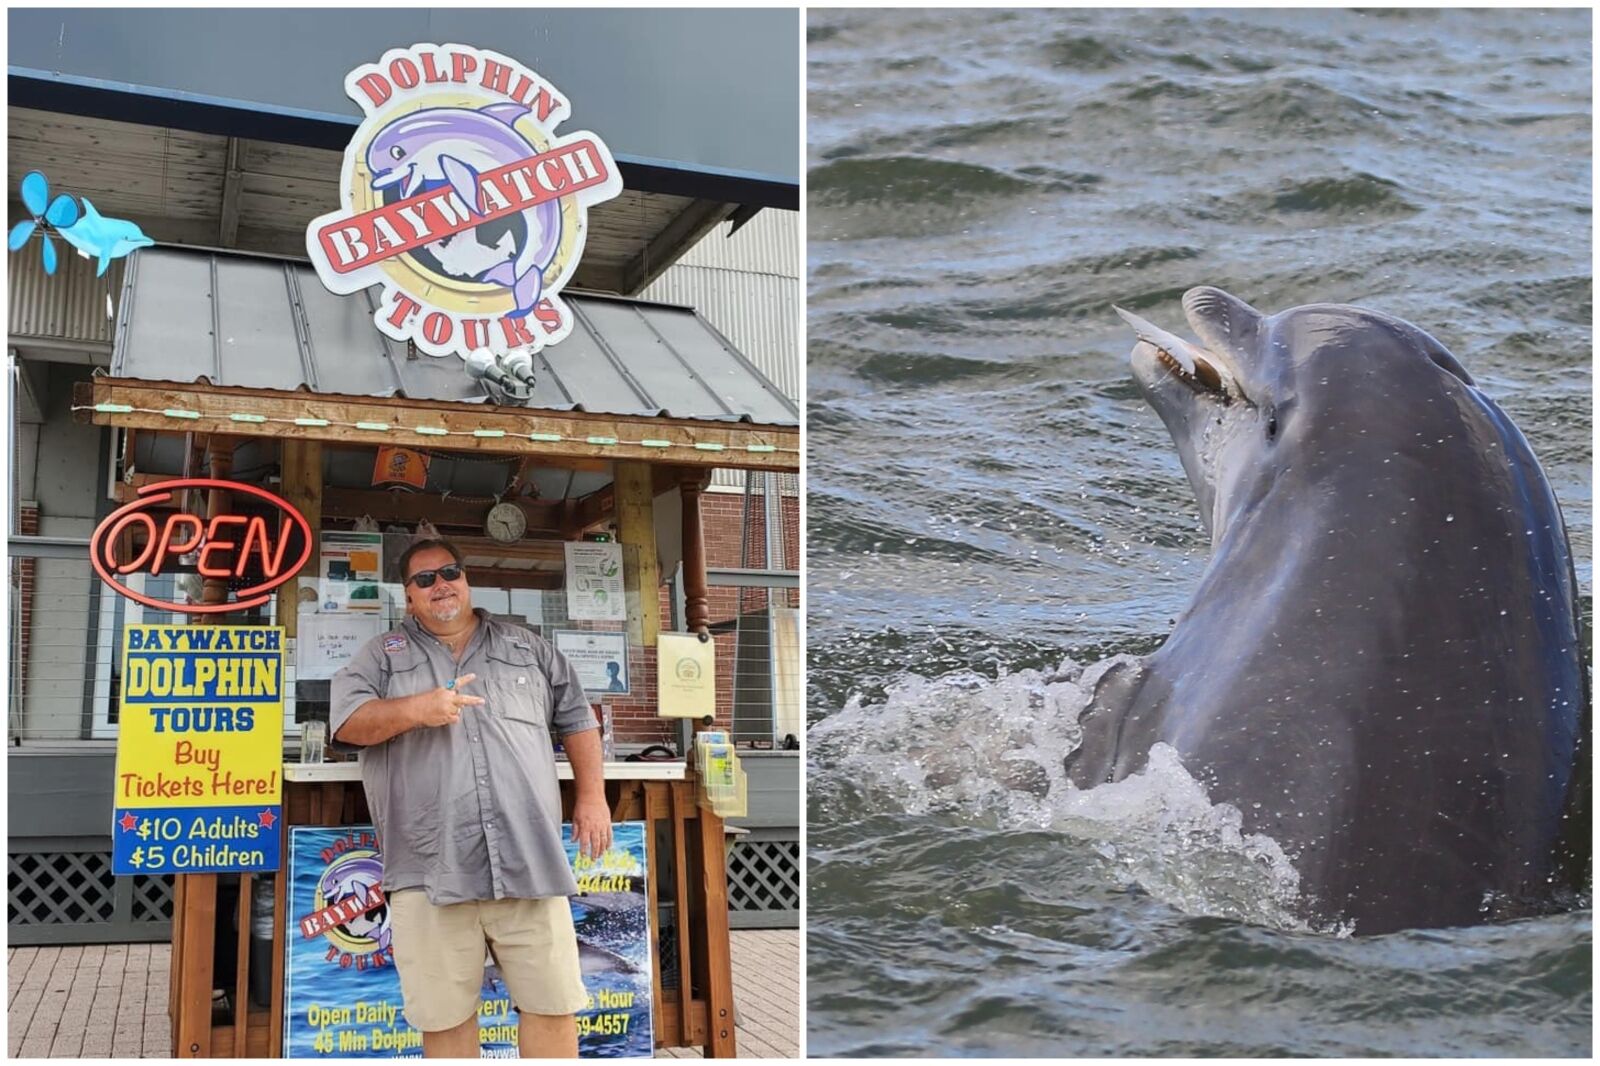 Man and dolphin at Baywatch Dolphin Galveston tours